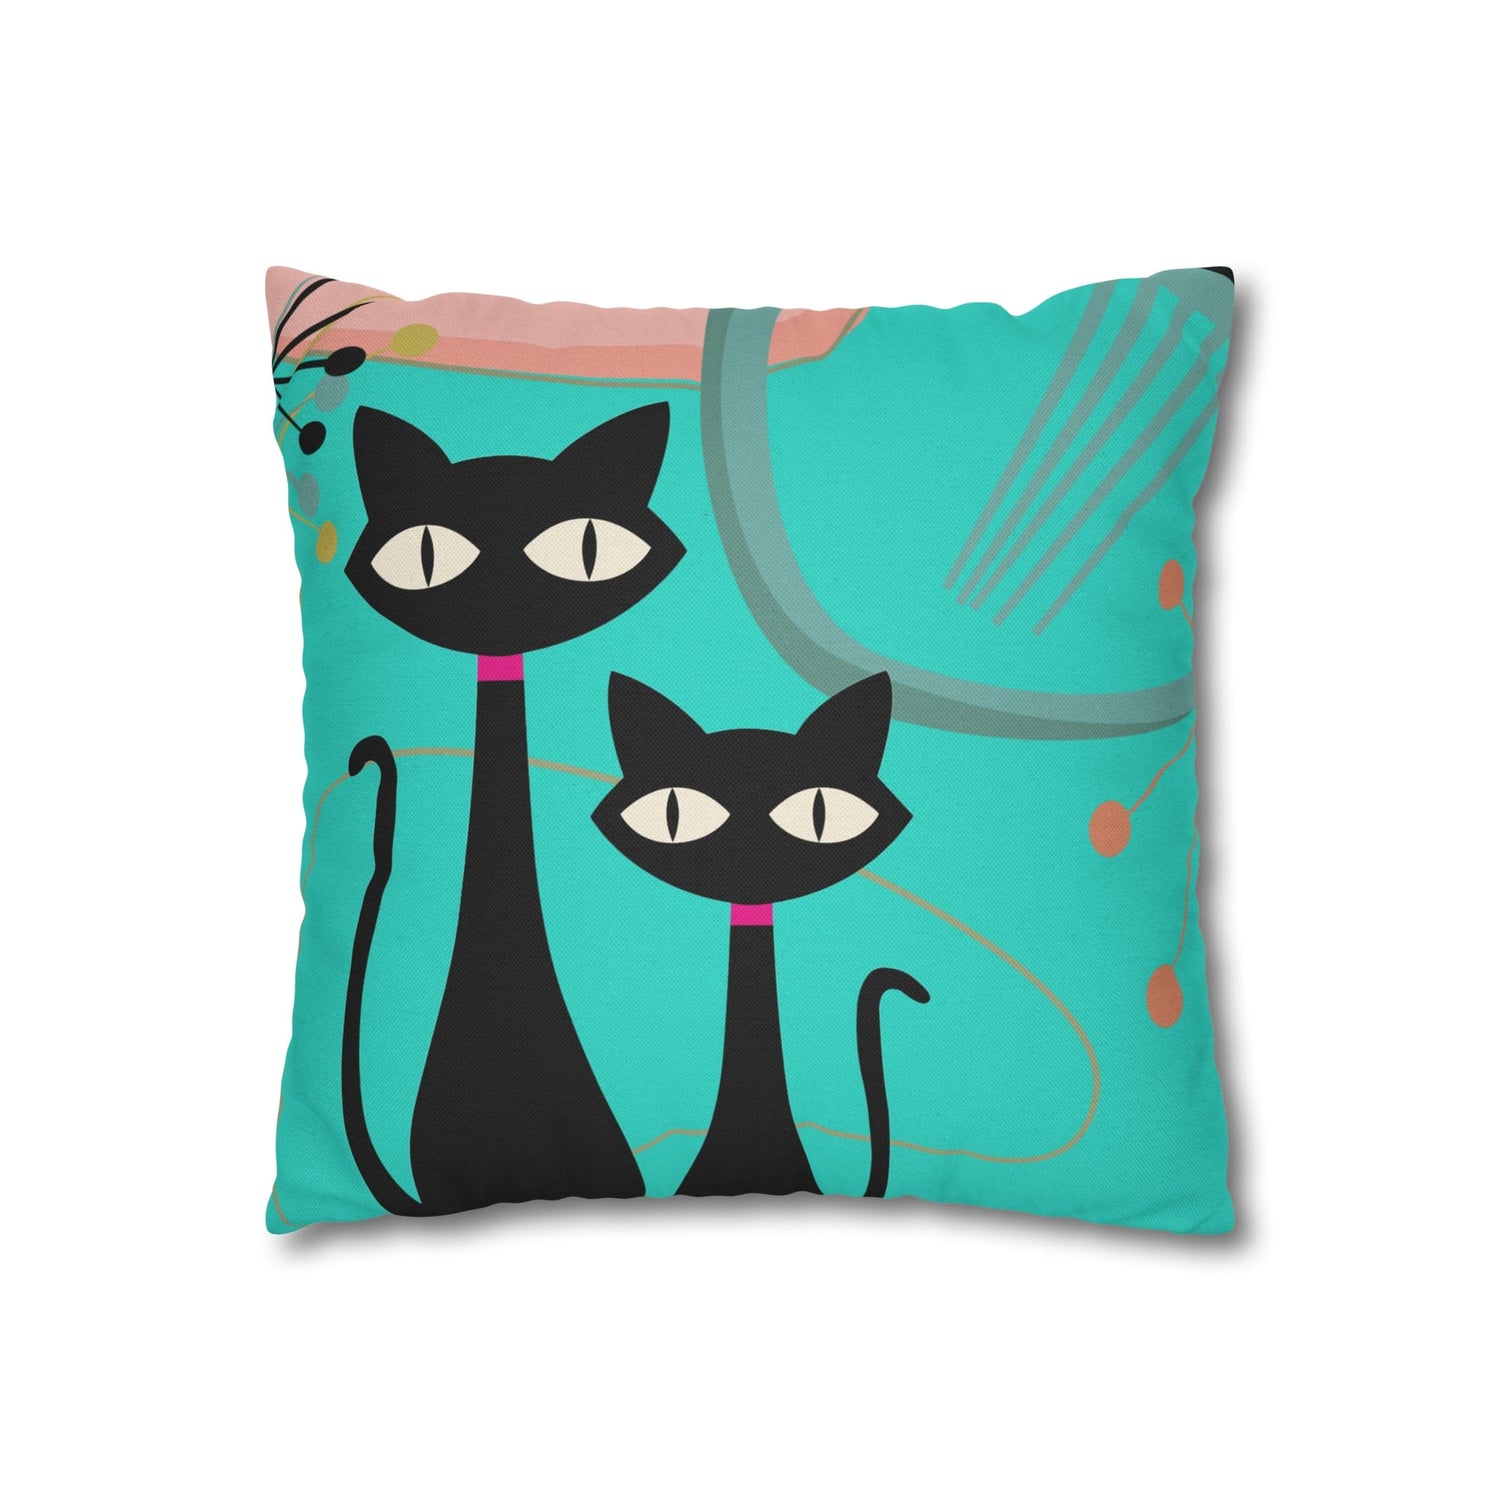 Kate McEnroe New York Retro Atomic Cat Throw Pillow Cover in Mid Century Modern Turquoise and Pink Throw Pillow Covers